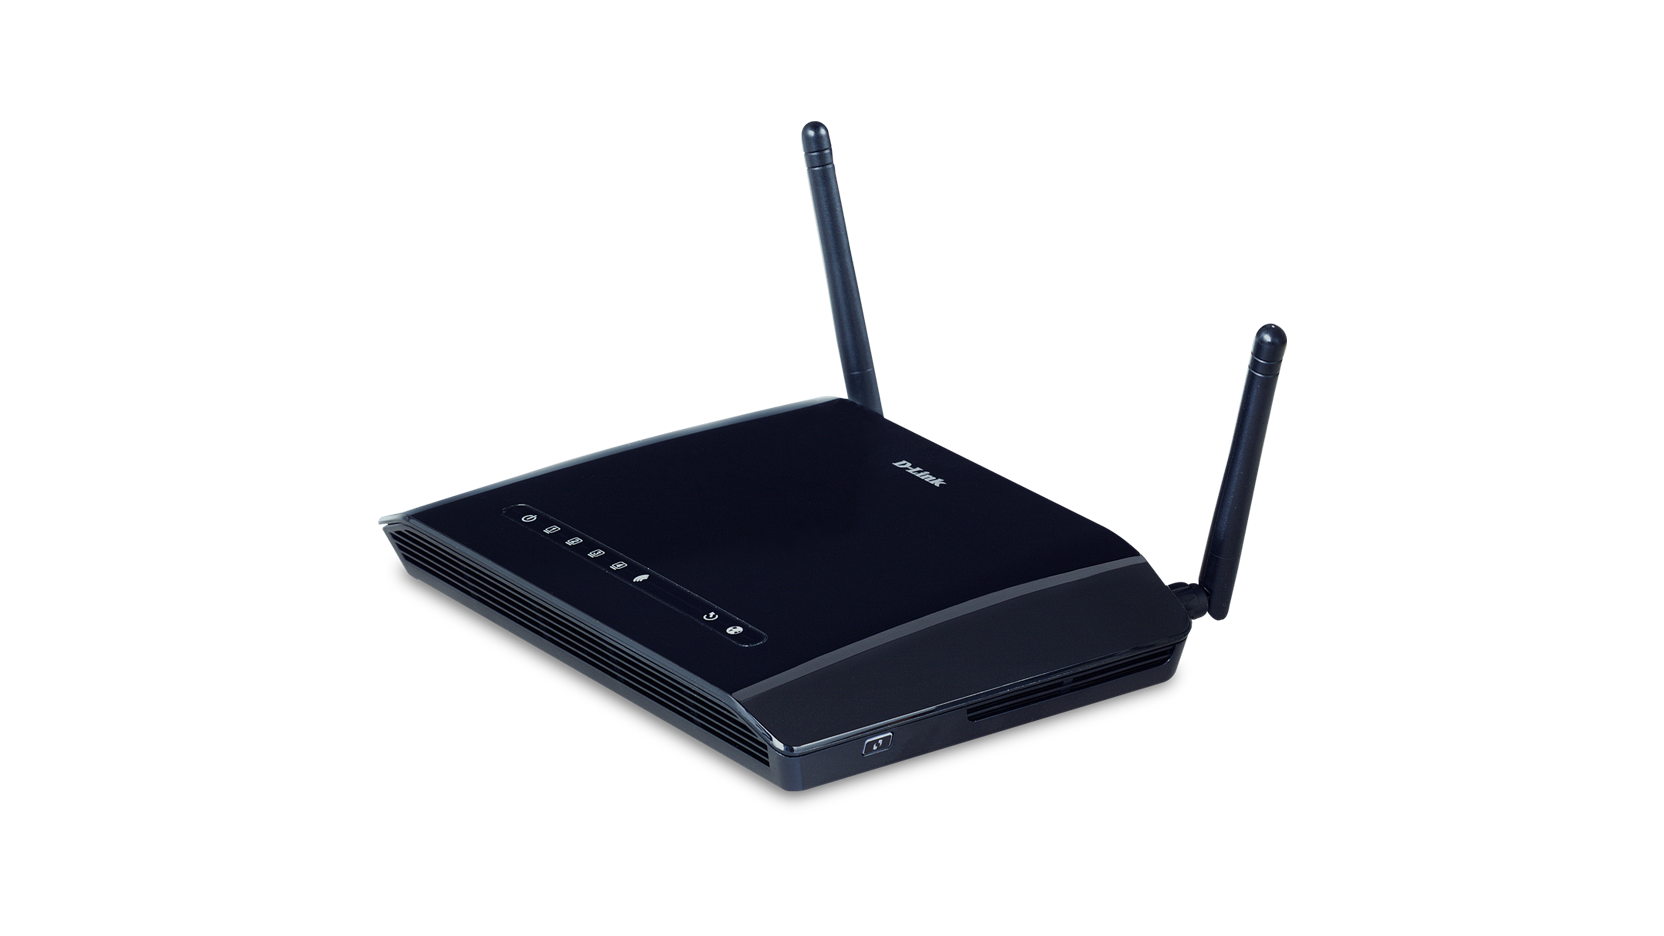 ADSL2/2 Modem with Wireless N 300 Router DSL-2740B 